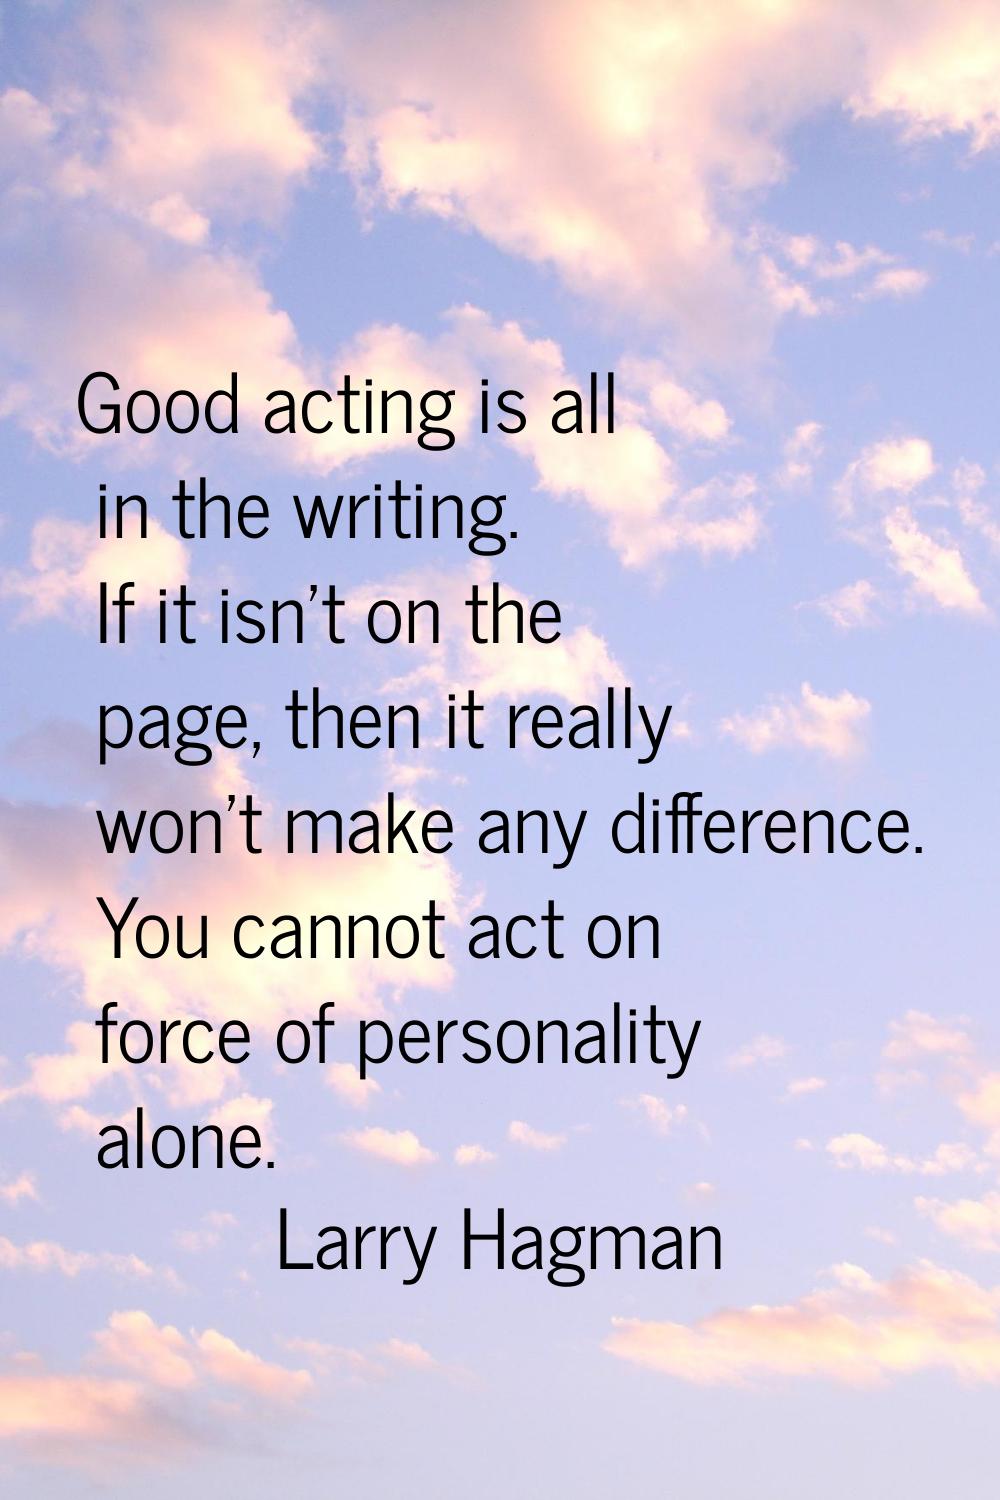 Good acting is all in the writing. If it isn't on the page, then it really won't make any differenc